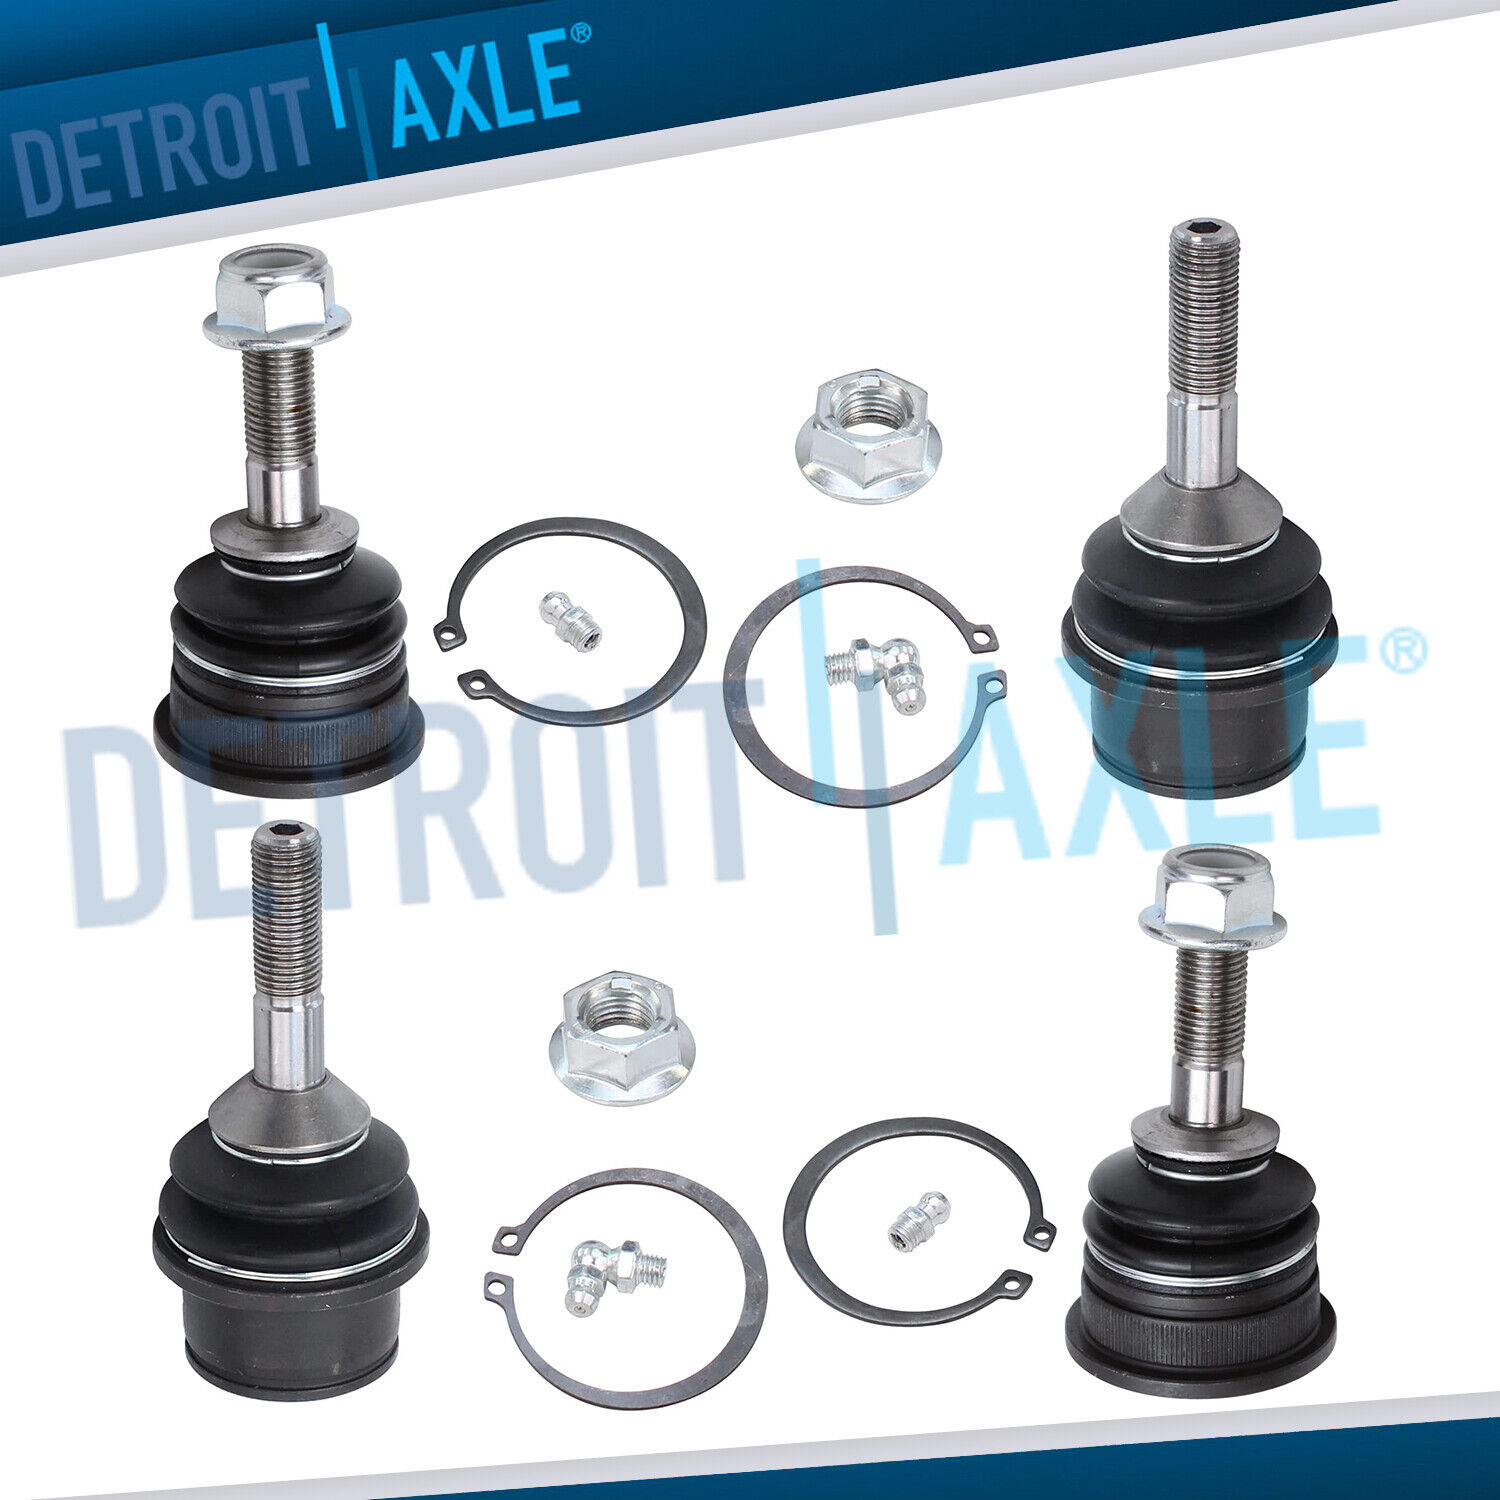 4 pc Set: New Front Upper + Lower Ball Joints for Town Car Crown Victoria Vic